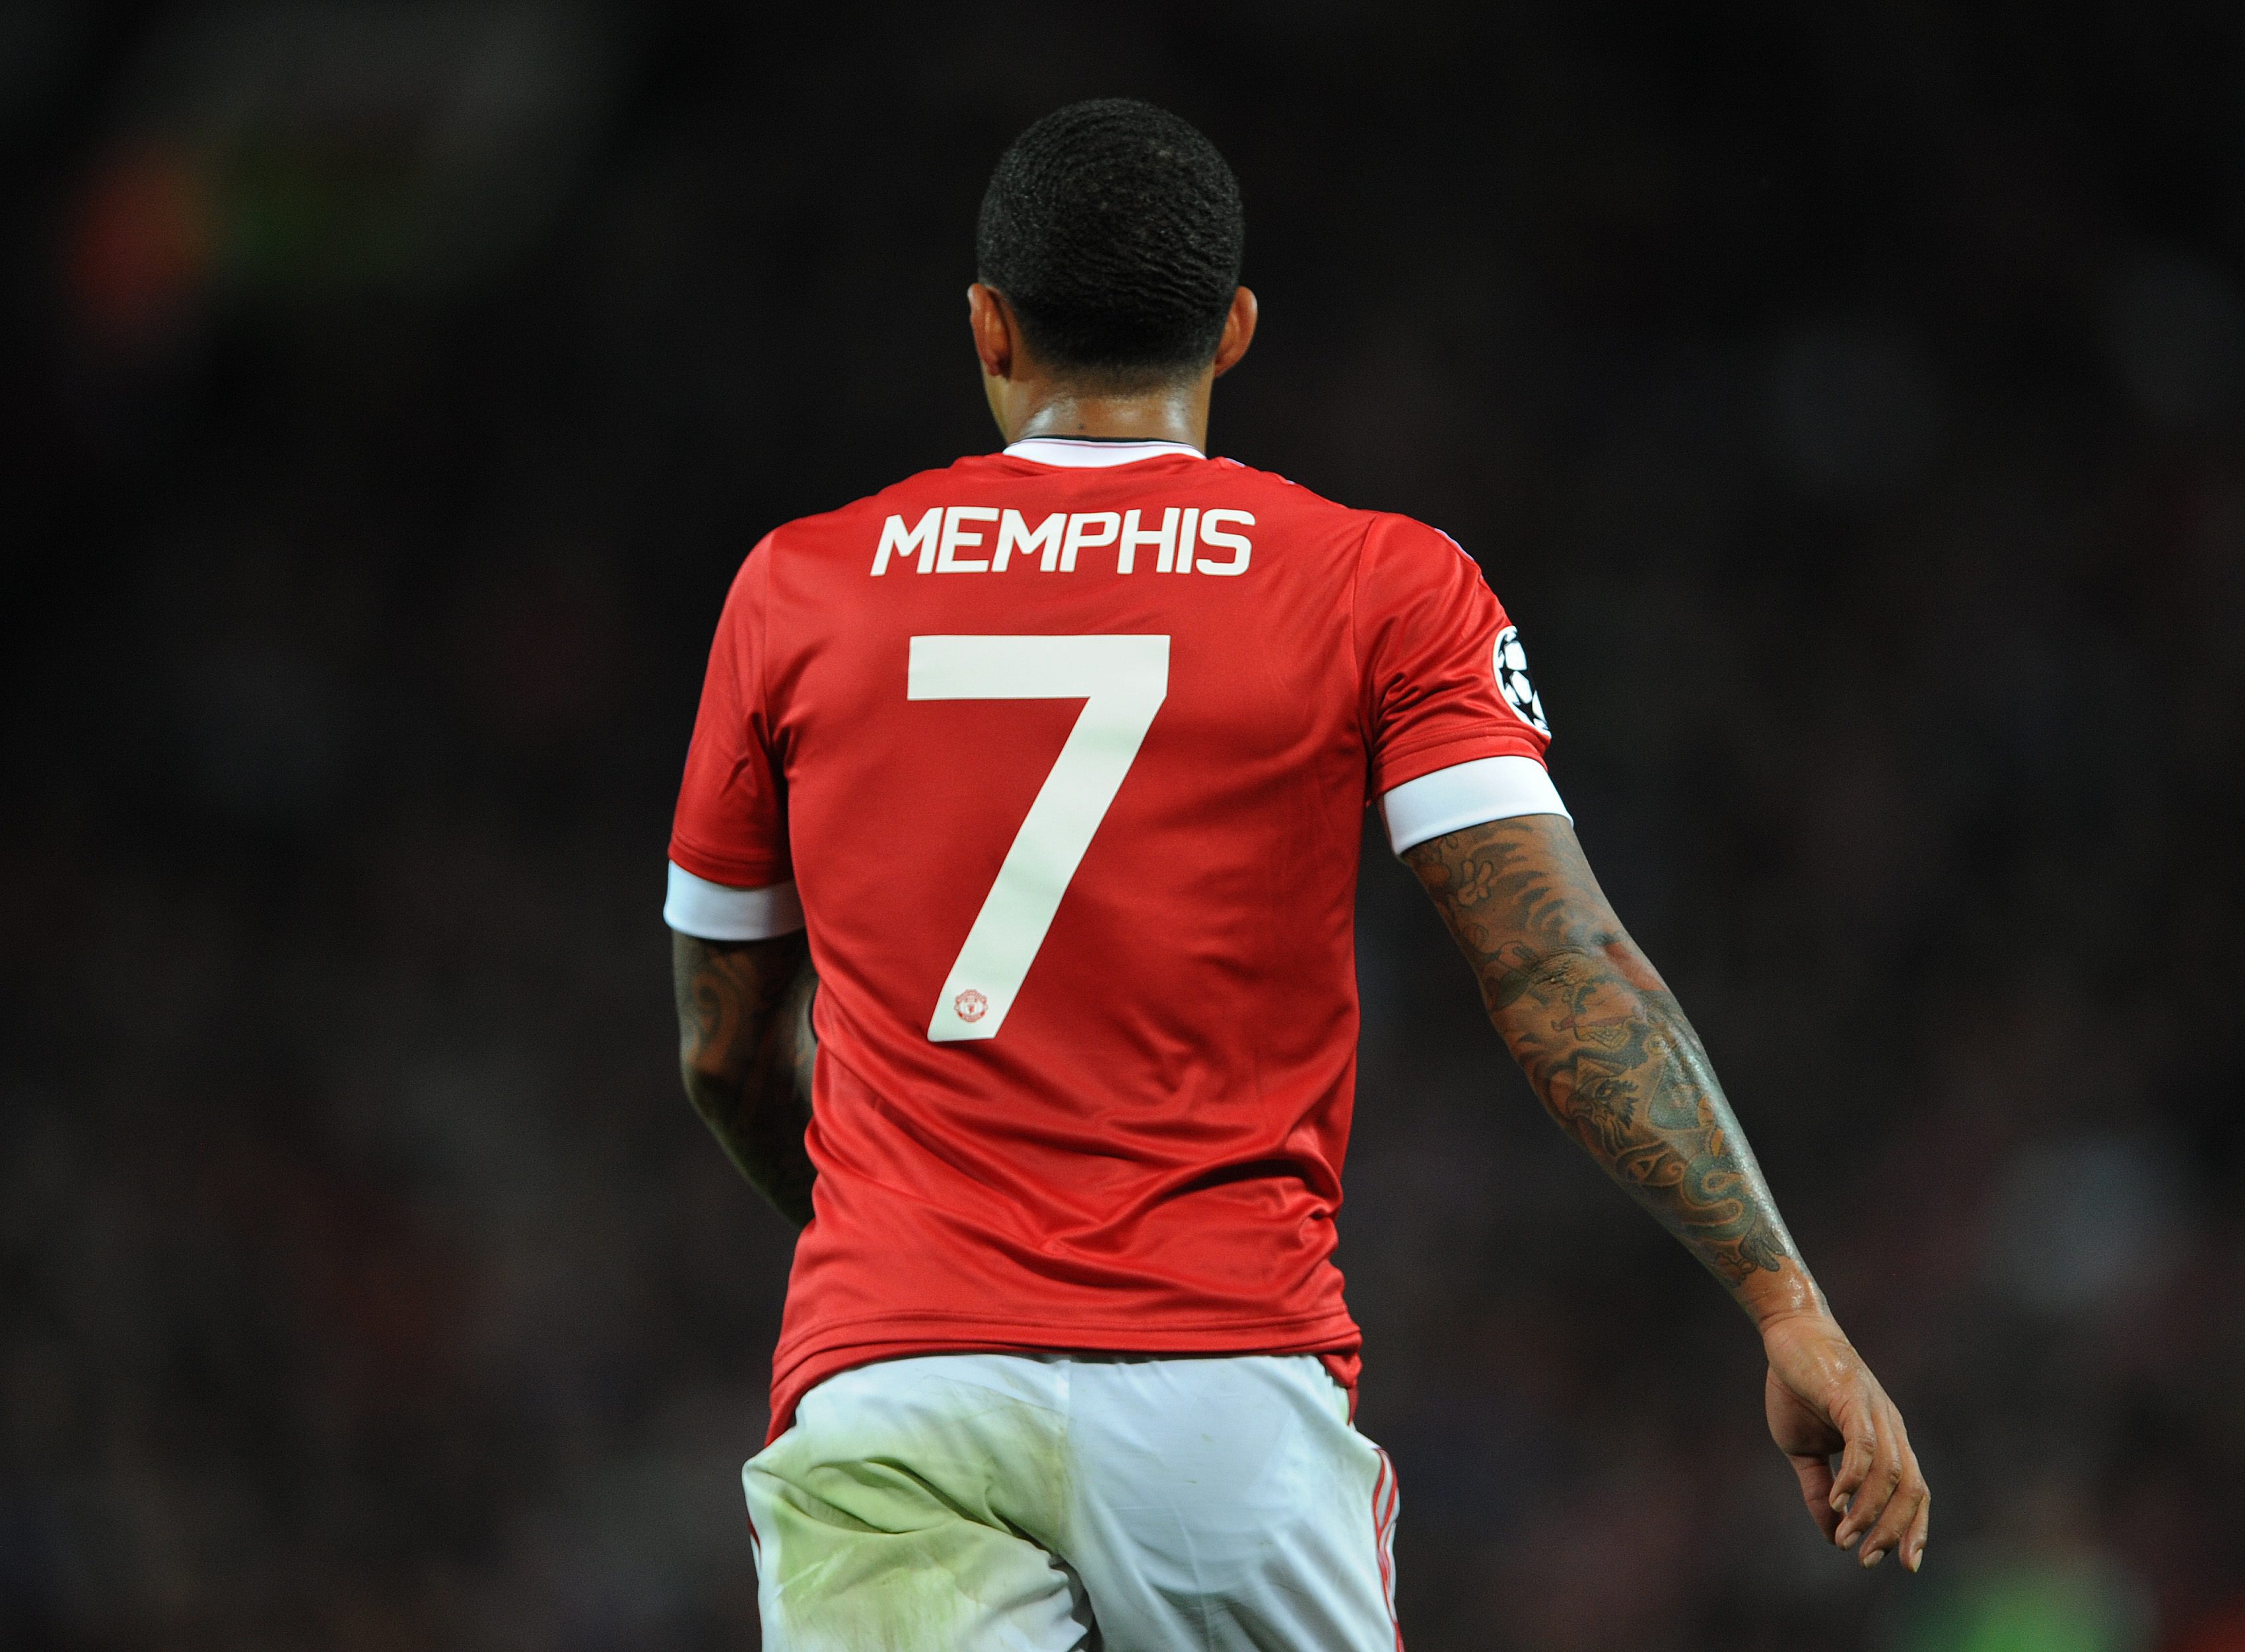 epa04888563 Manchester United's Memphis Depay in action during the UEFA Champions League play-off round first leg soccer match between Manchester United and Club Brugge held at the Old Trafford in Manchester, Britain, 18 August 2015.  EPA/PETER POWELL